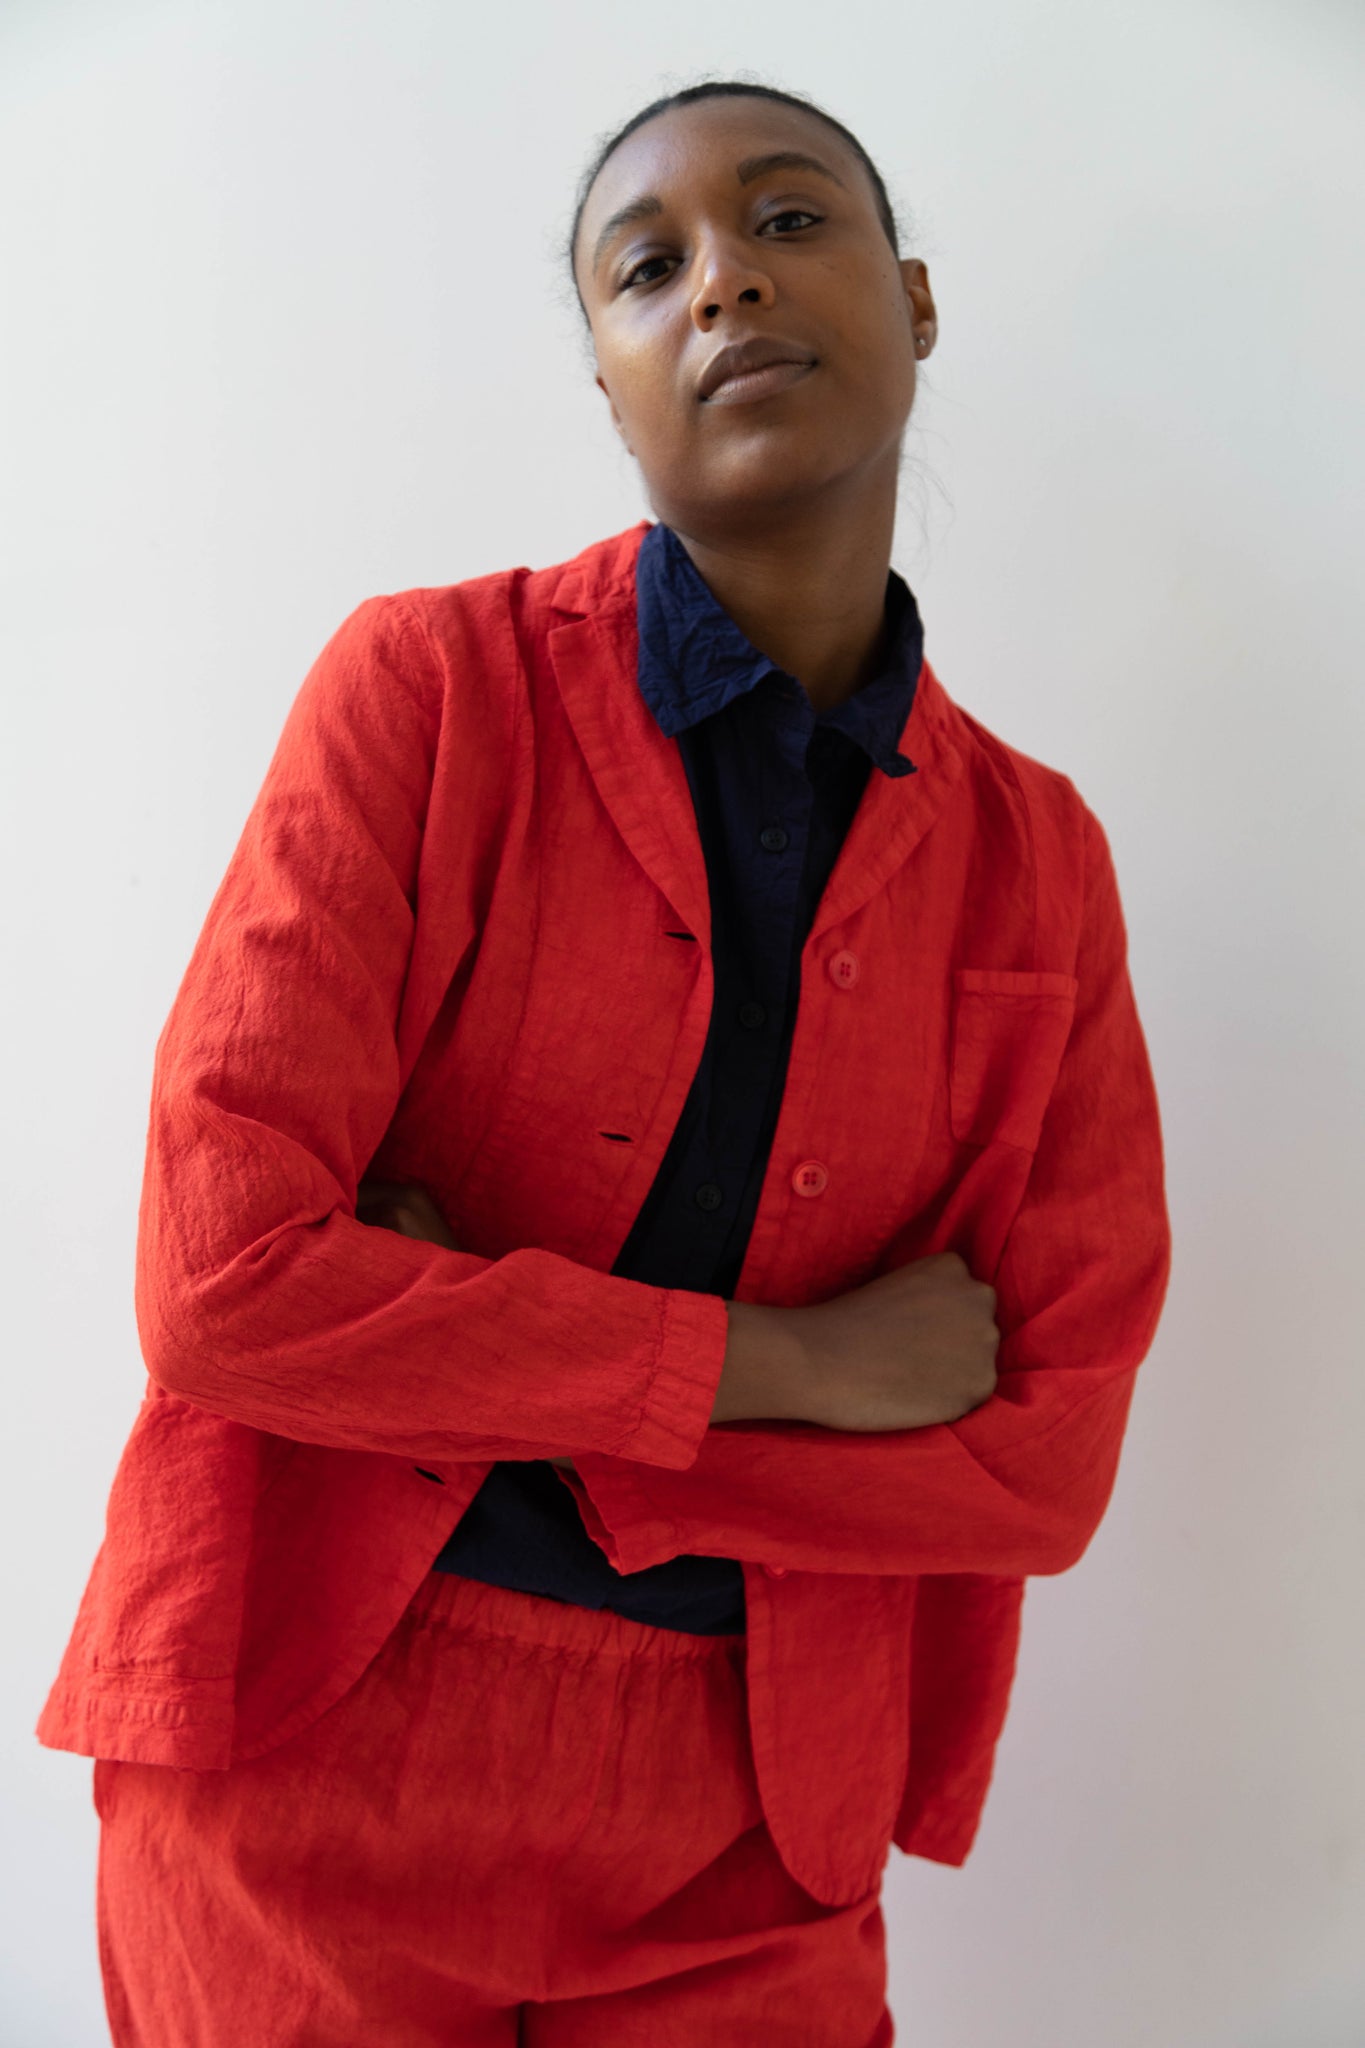 Manuelle Guibal | Linen Jacket in Bright Red